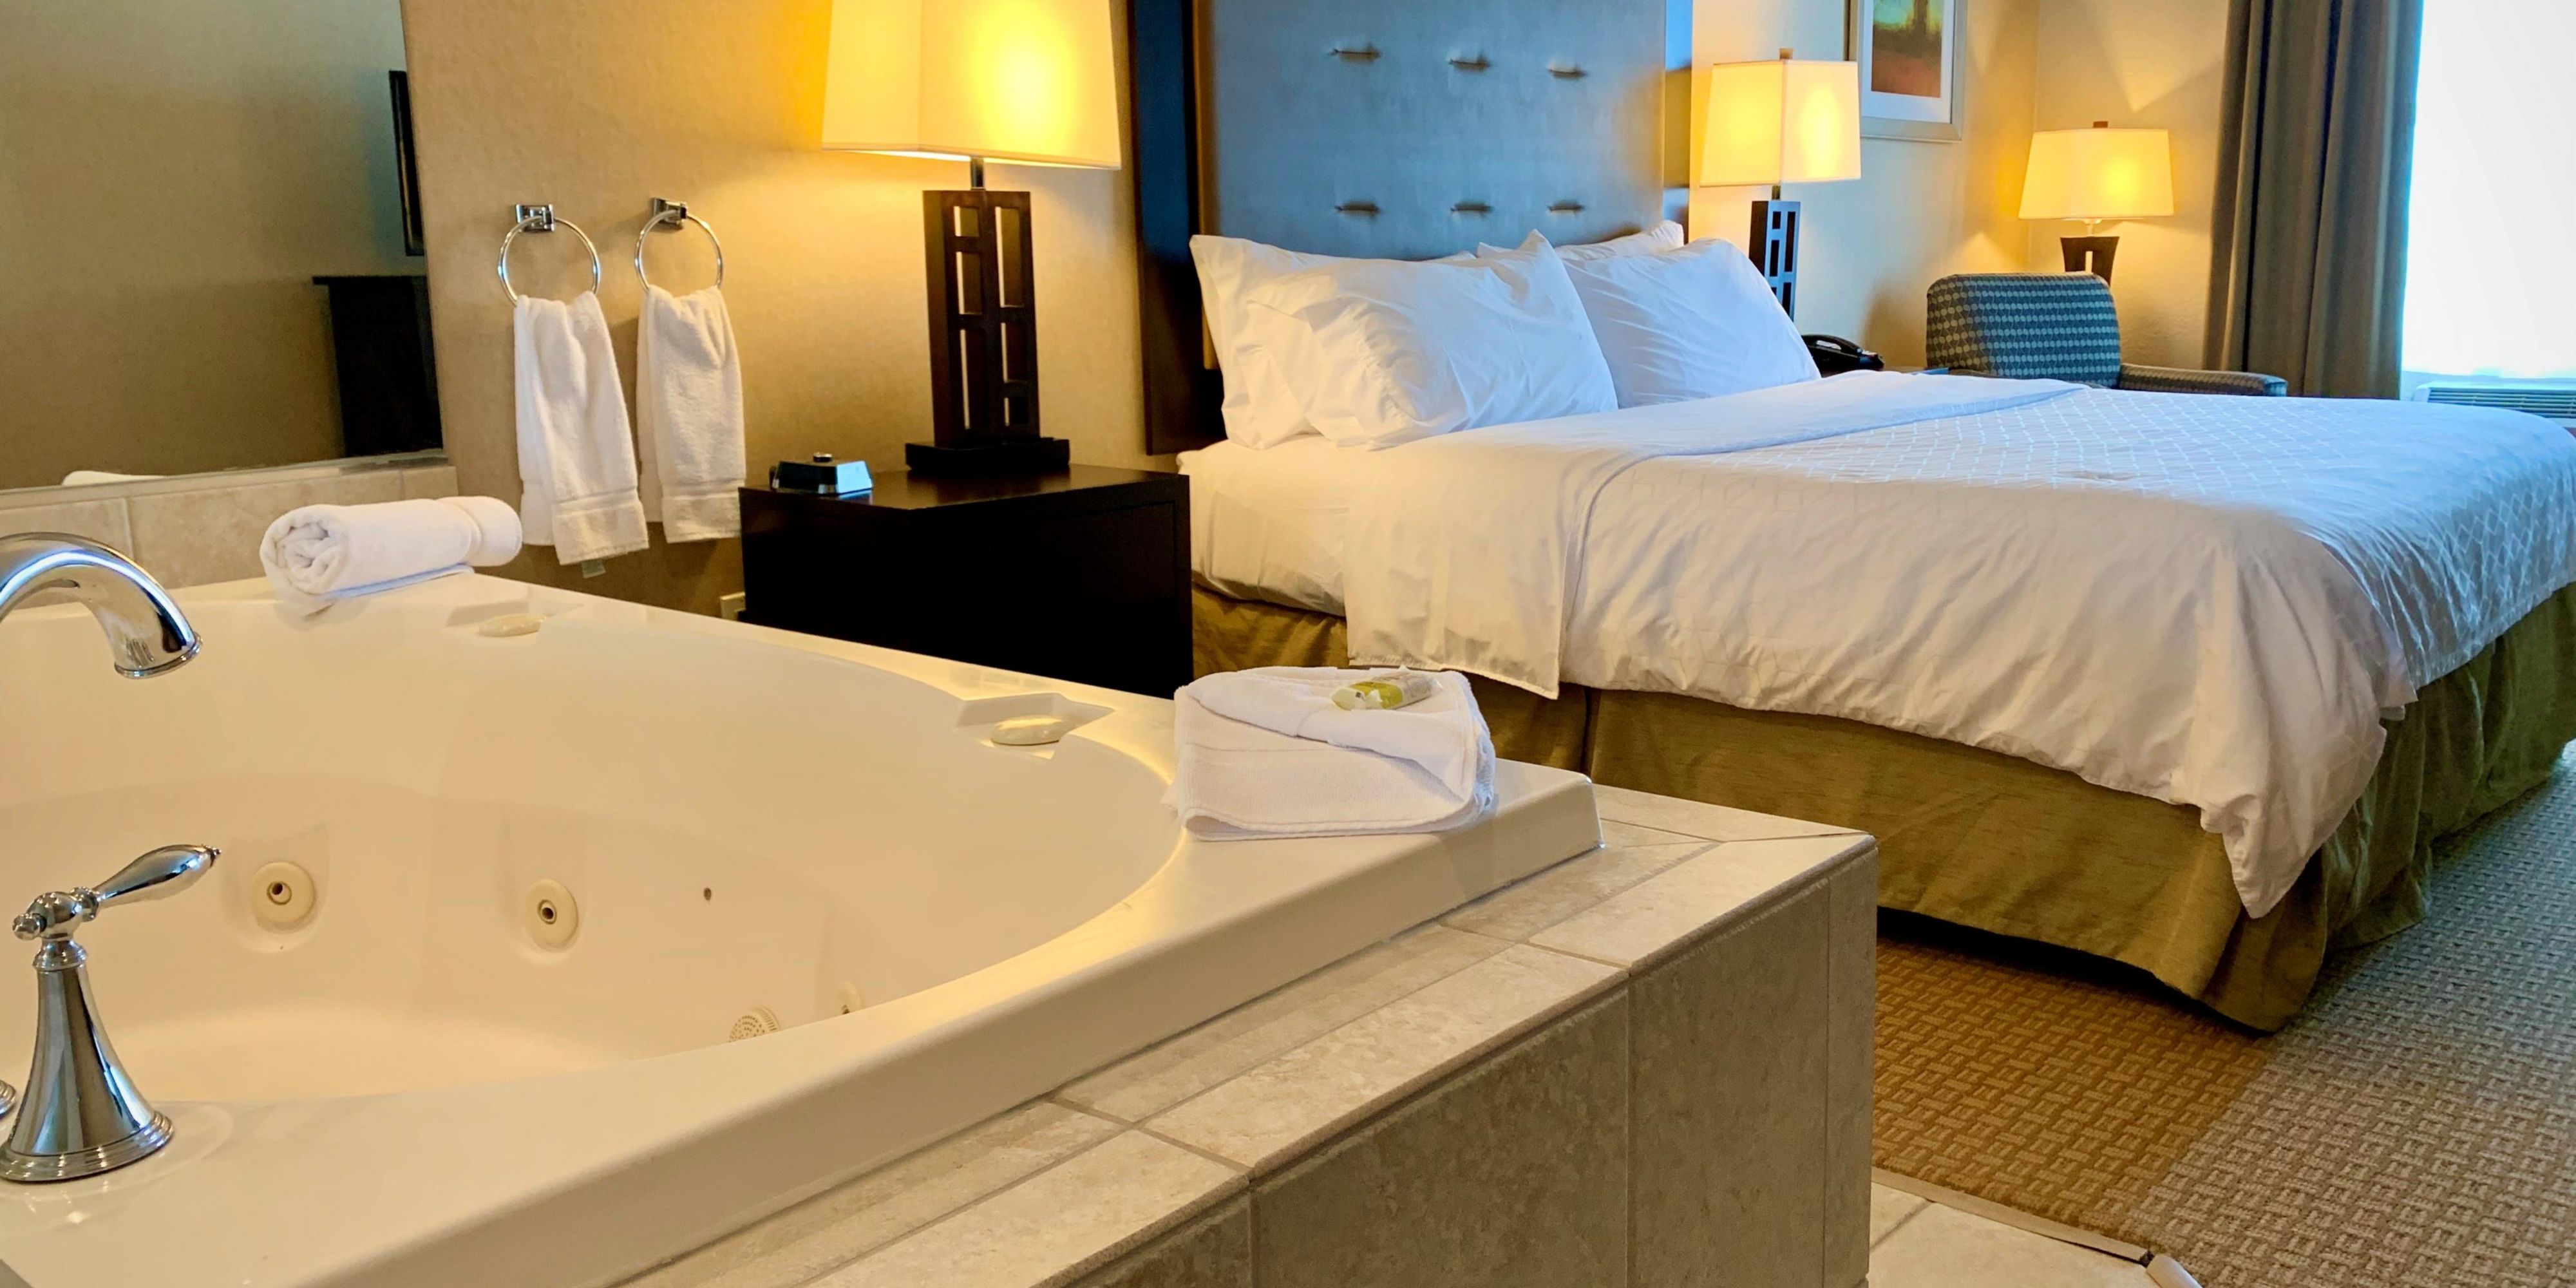 Whether you are looking for a romantic escape, or  just to soothe away the day, one of our several different styles of whirlpool rooms and suites are sure to offer you the blissful relaxation you deserve.